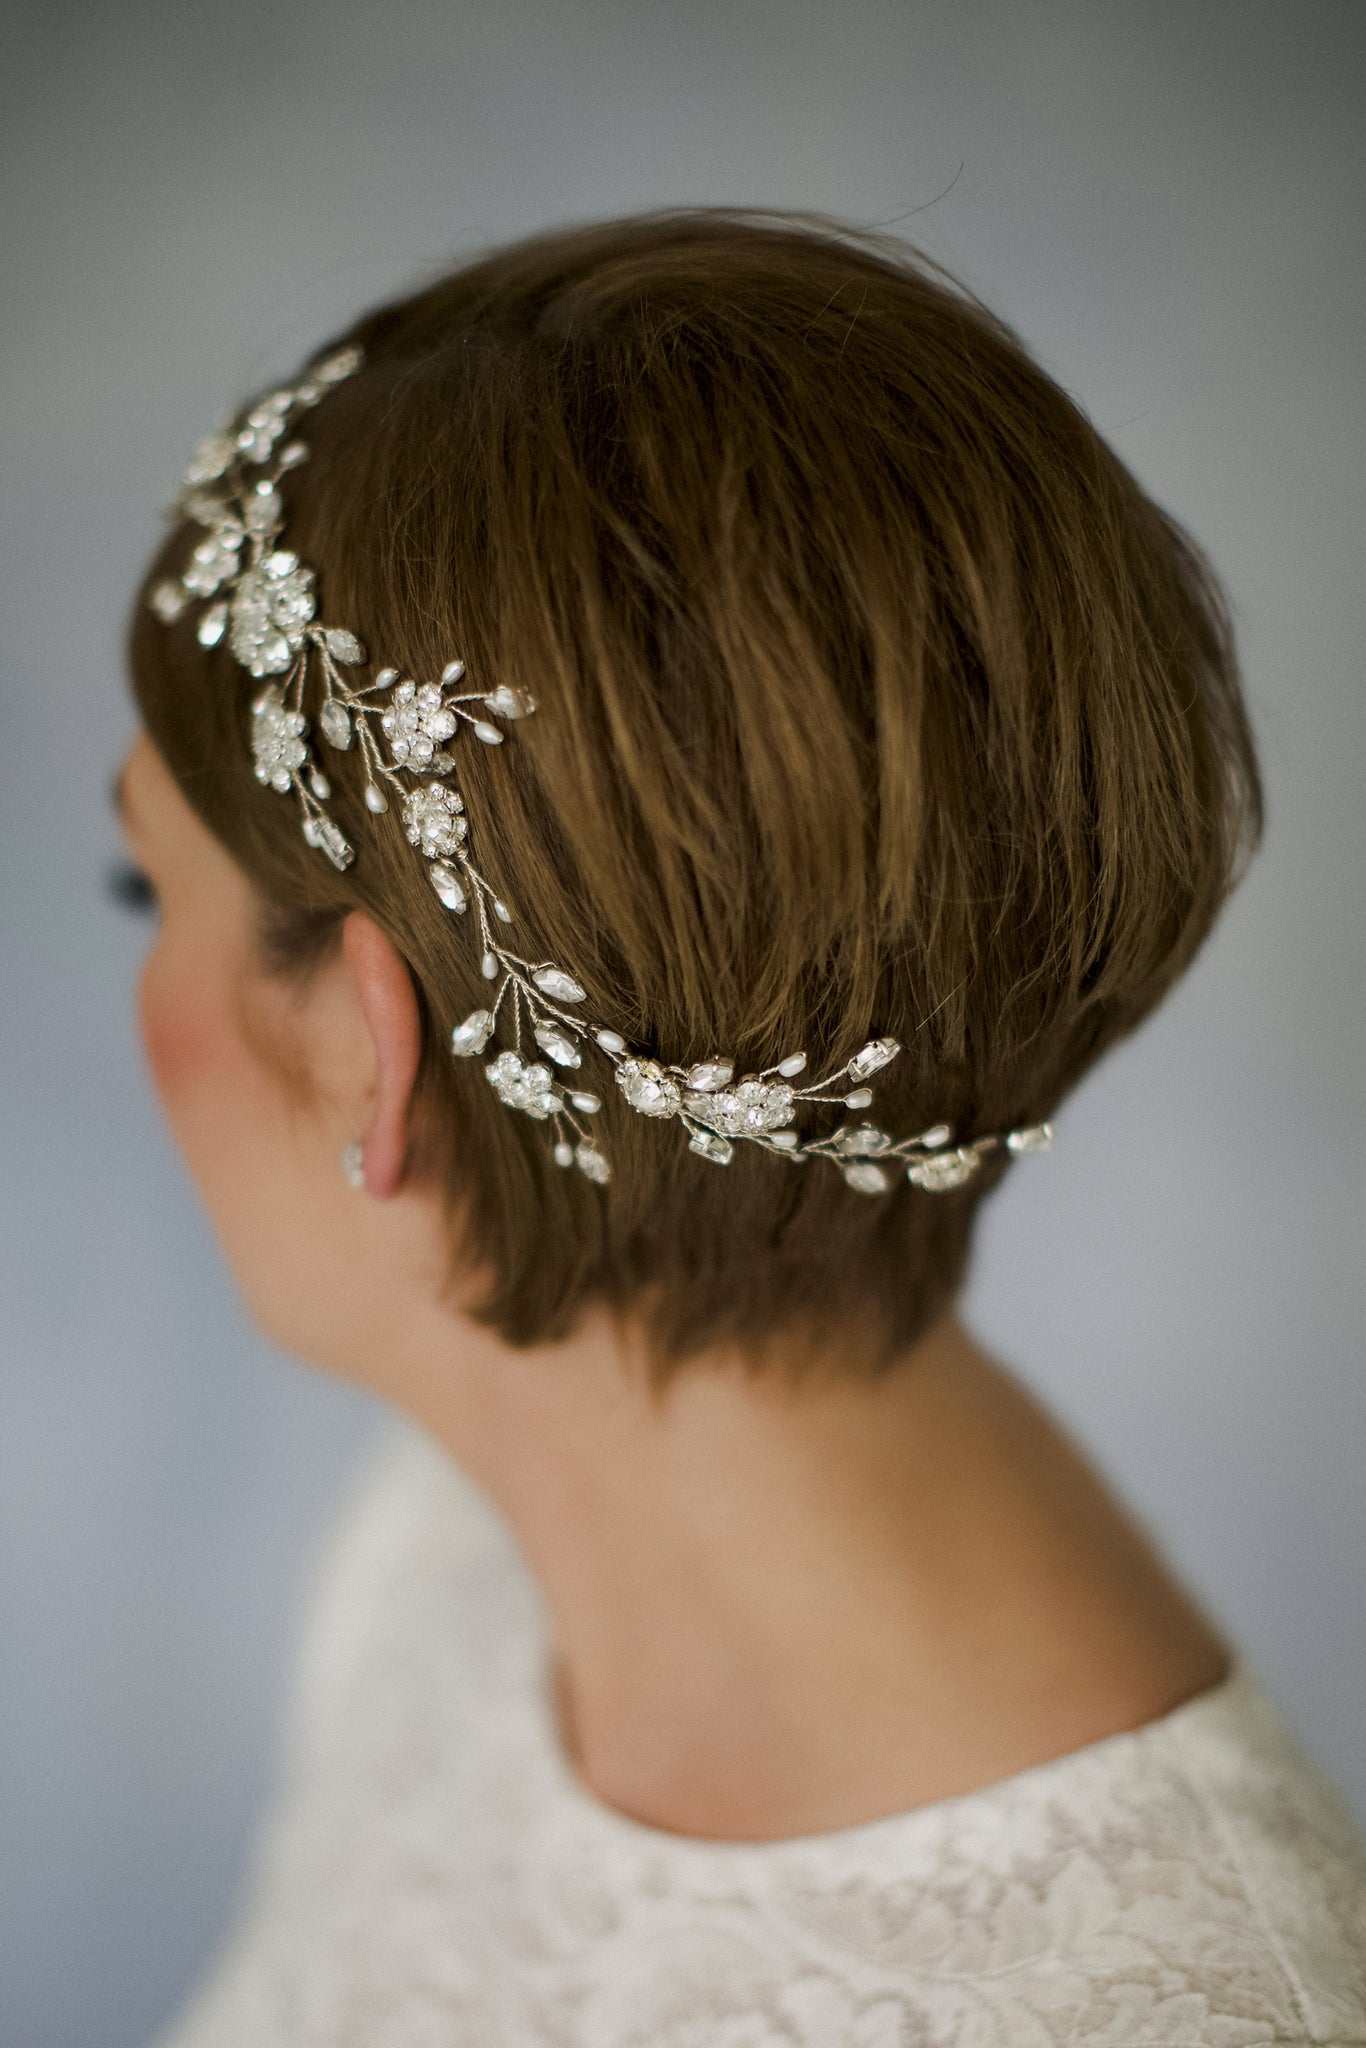 Crystal wedding hair accessory hairvine for a short haired bride 